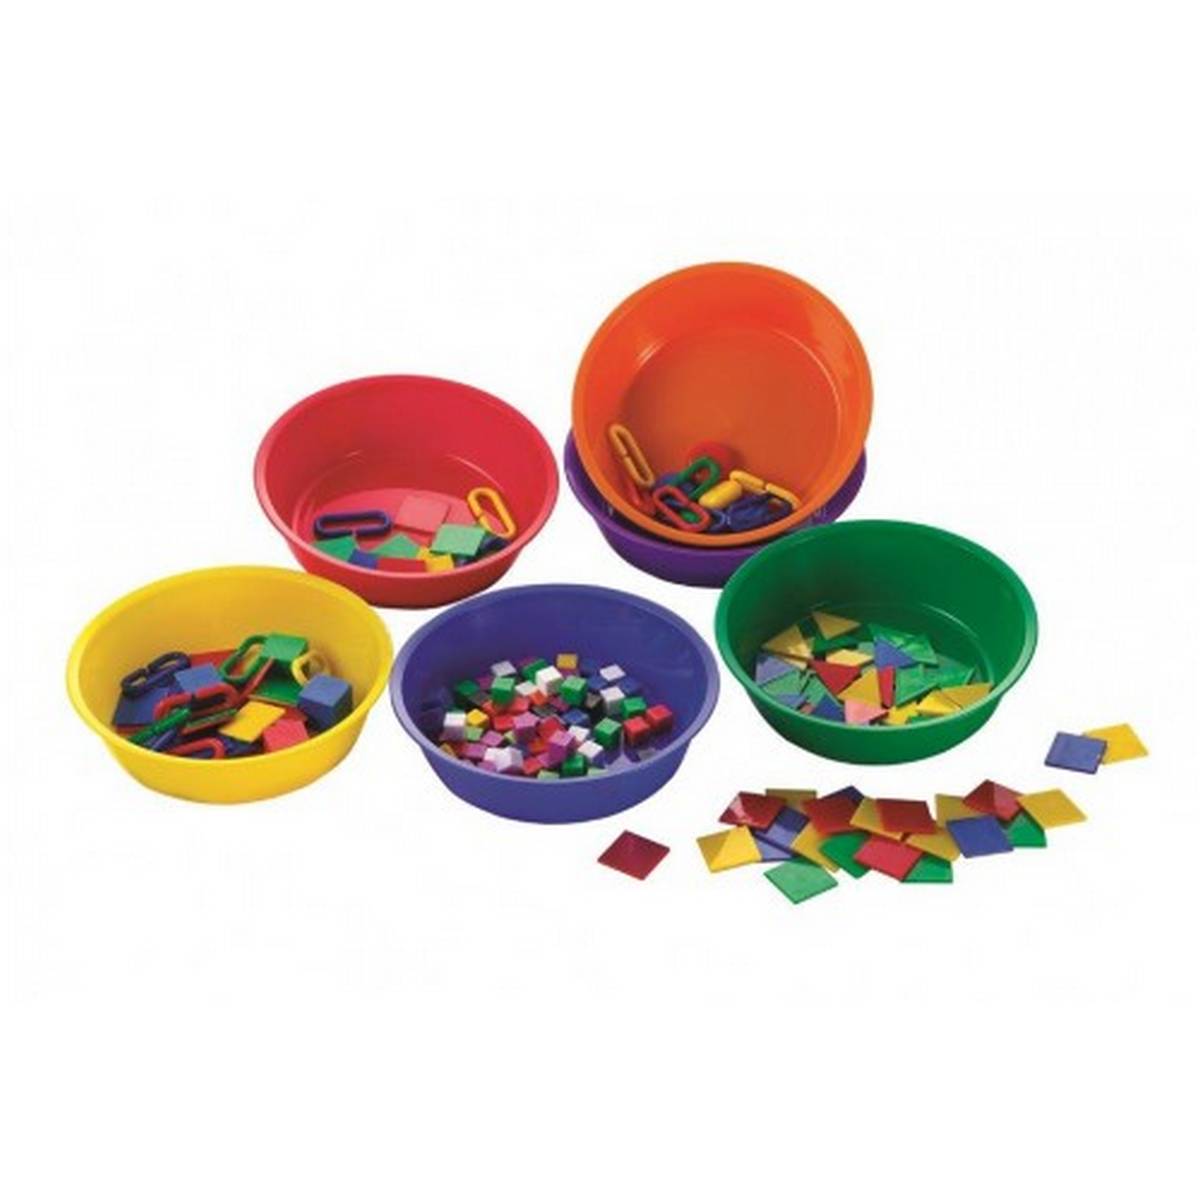 Coloured Sorting Bowls 15cm Pack of 6